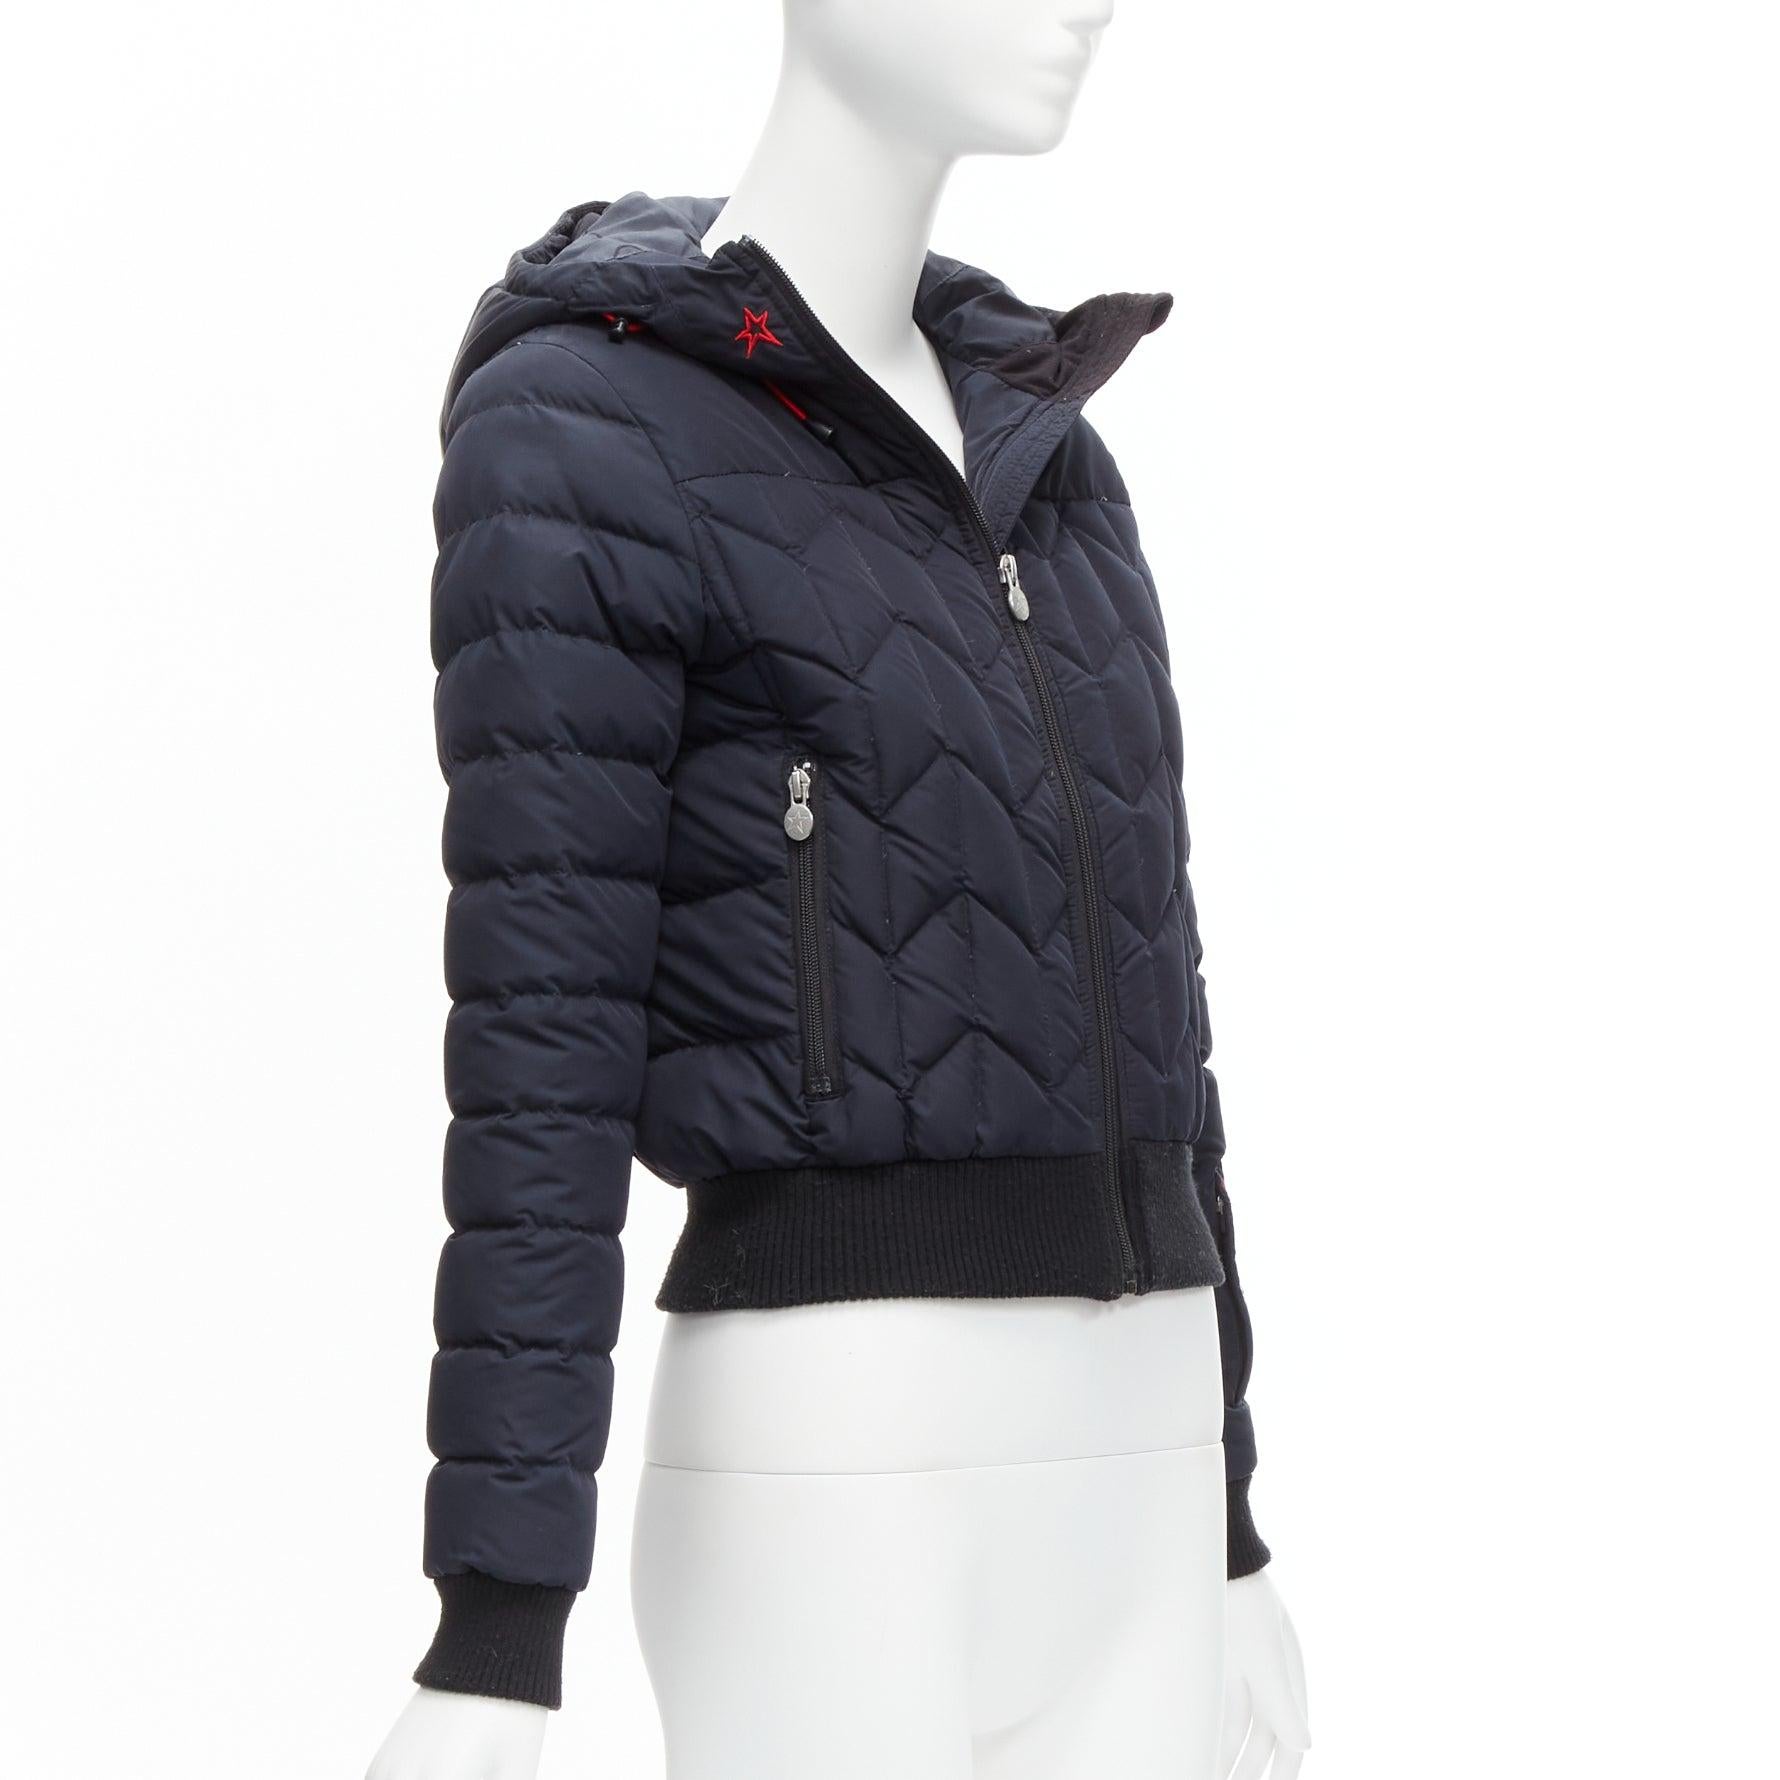 Women's PERFECT MOMENT red logo navy blue chevron quilted hooded puffer jacket XS